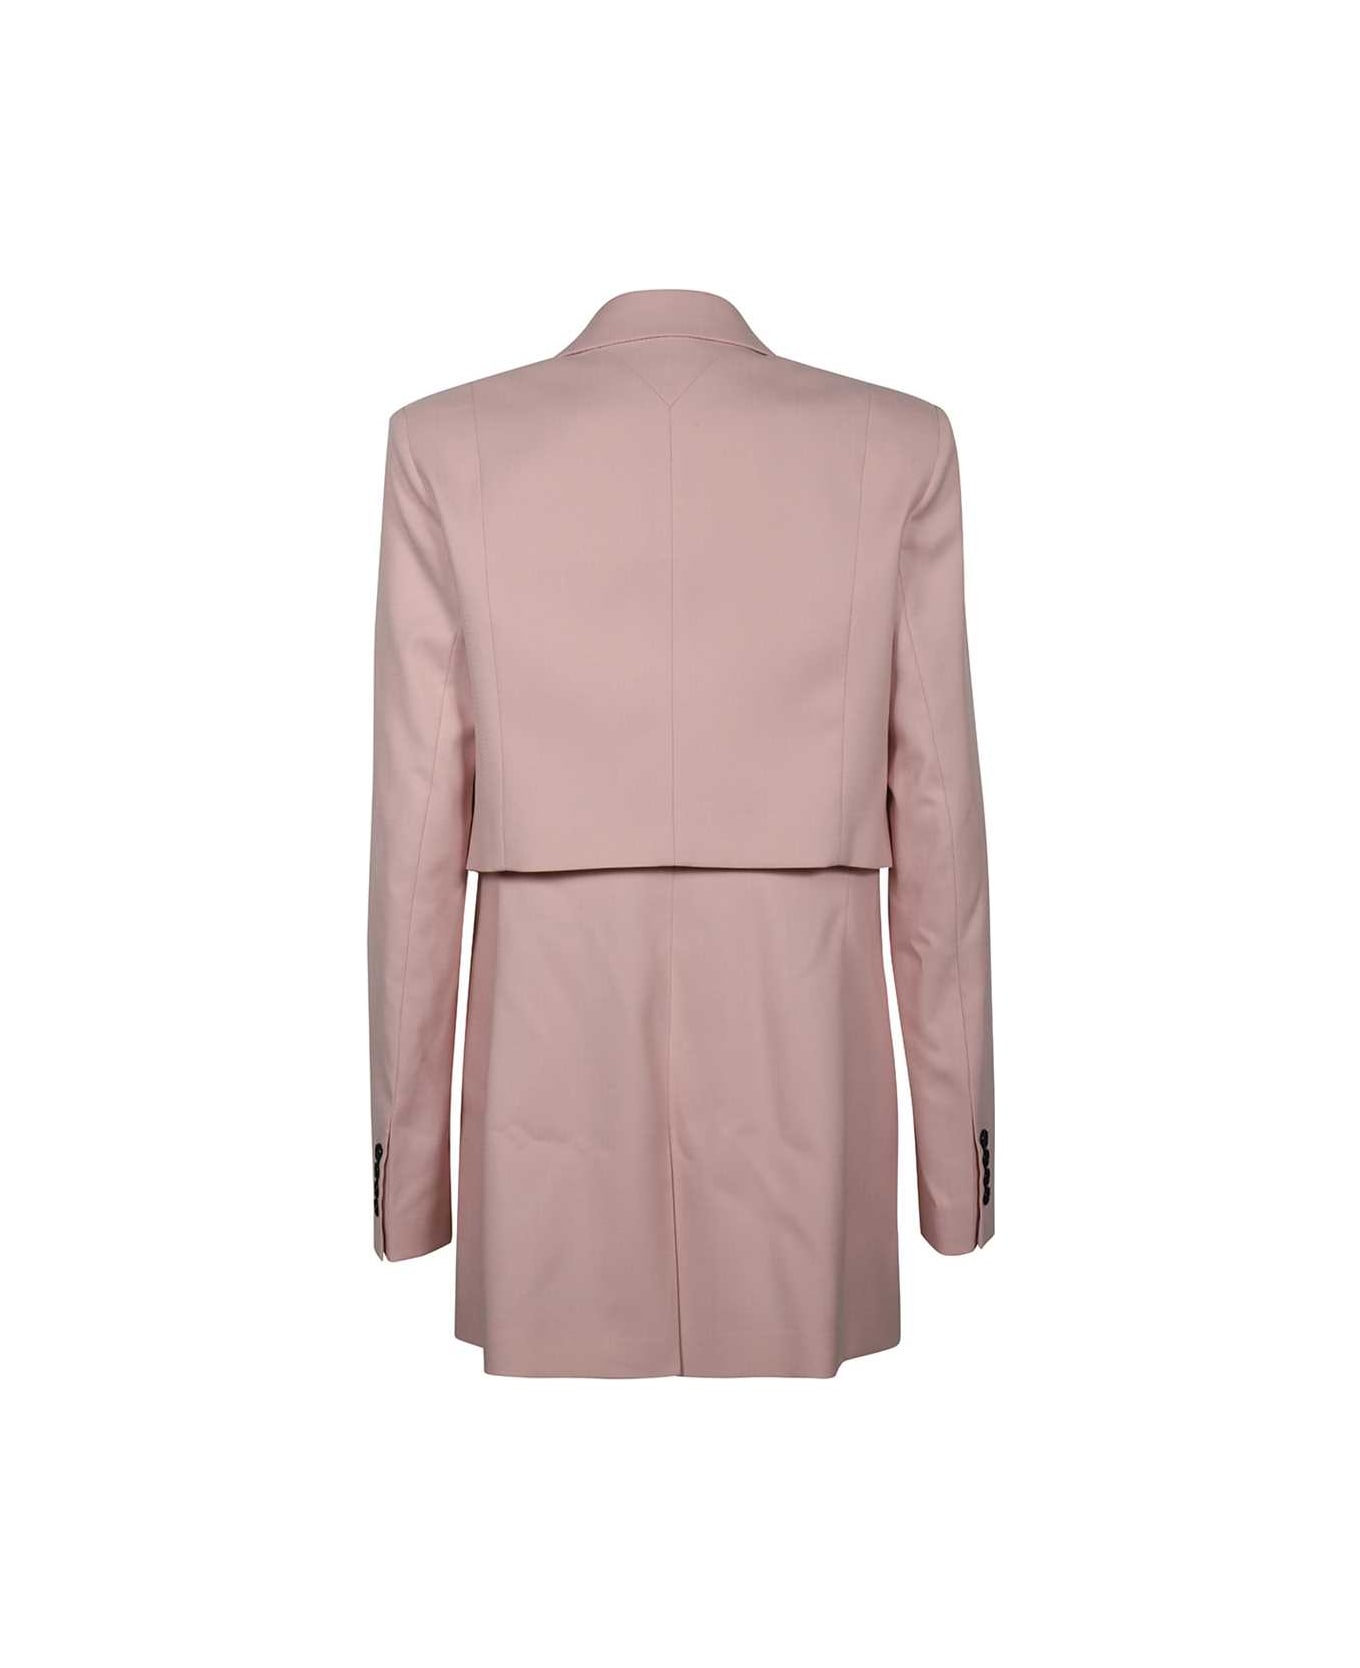 Karl Lagerfeld Double Breasted Blazer - Pink